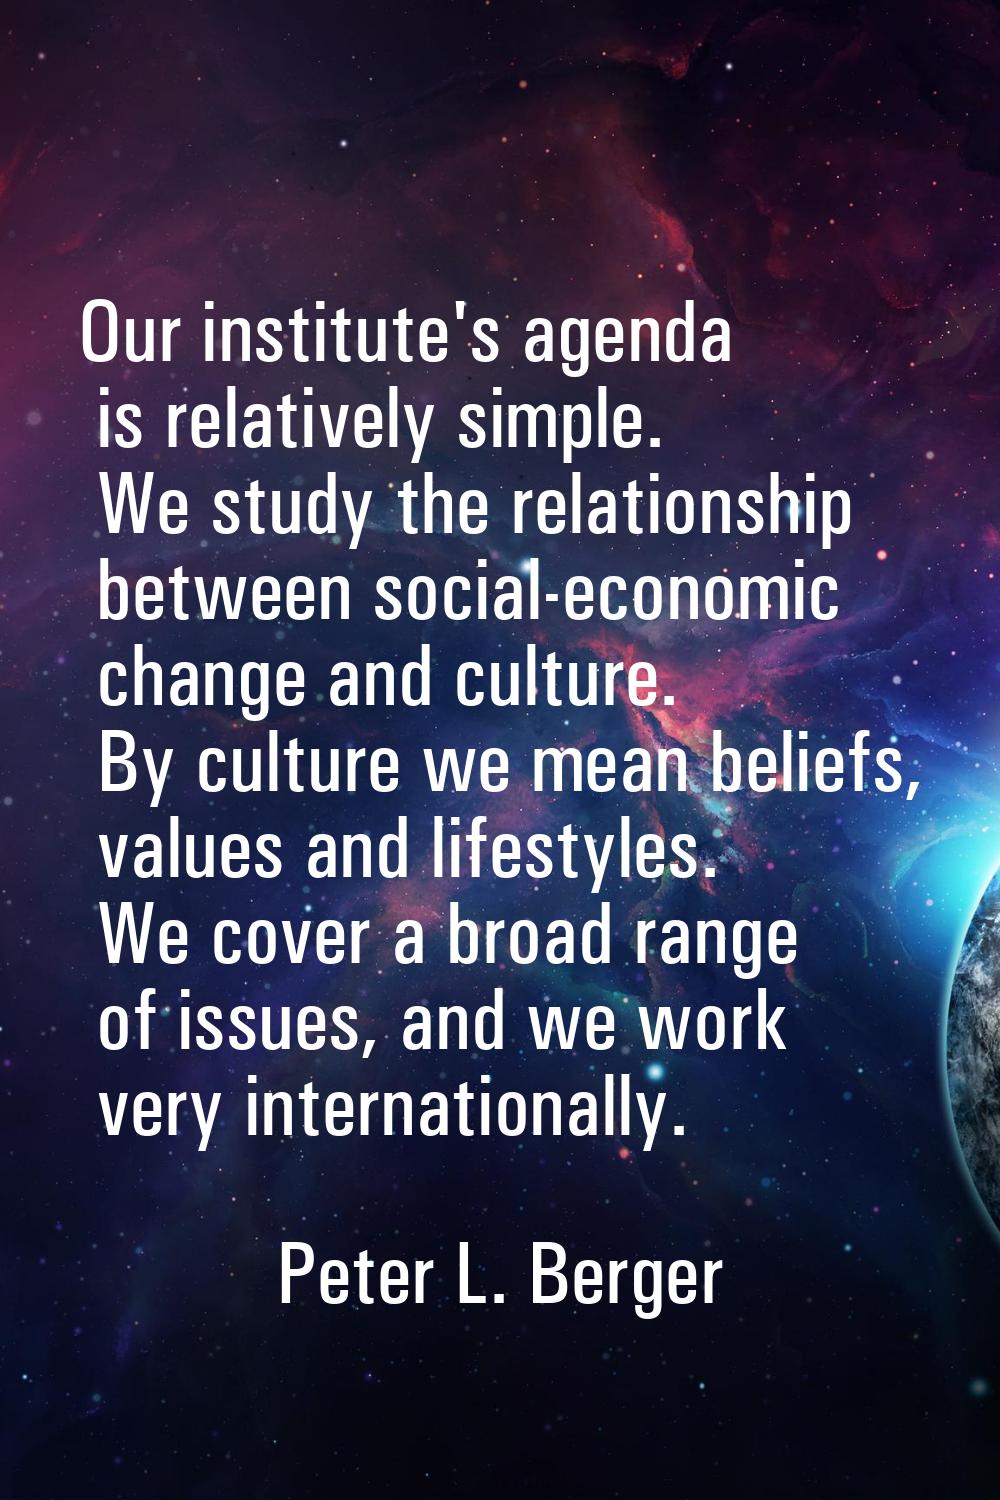 Our institute's agenda is relatively simple. We study the relationship between social-economic chan